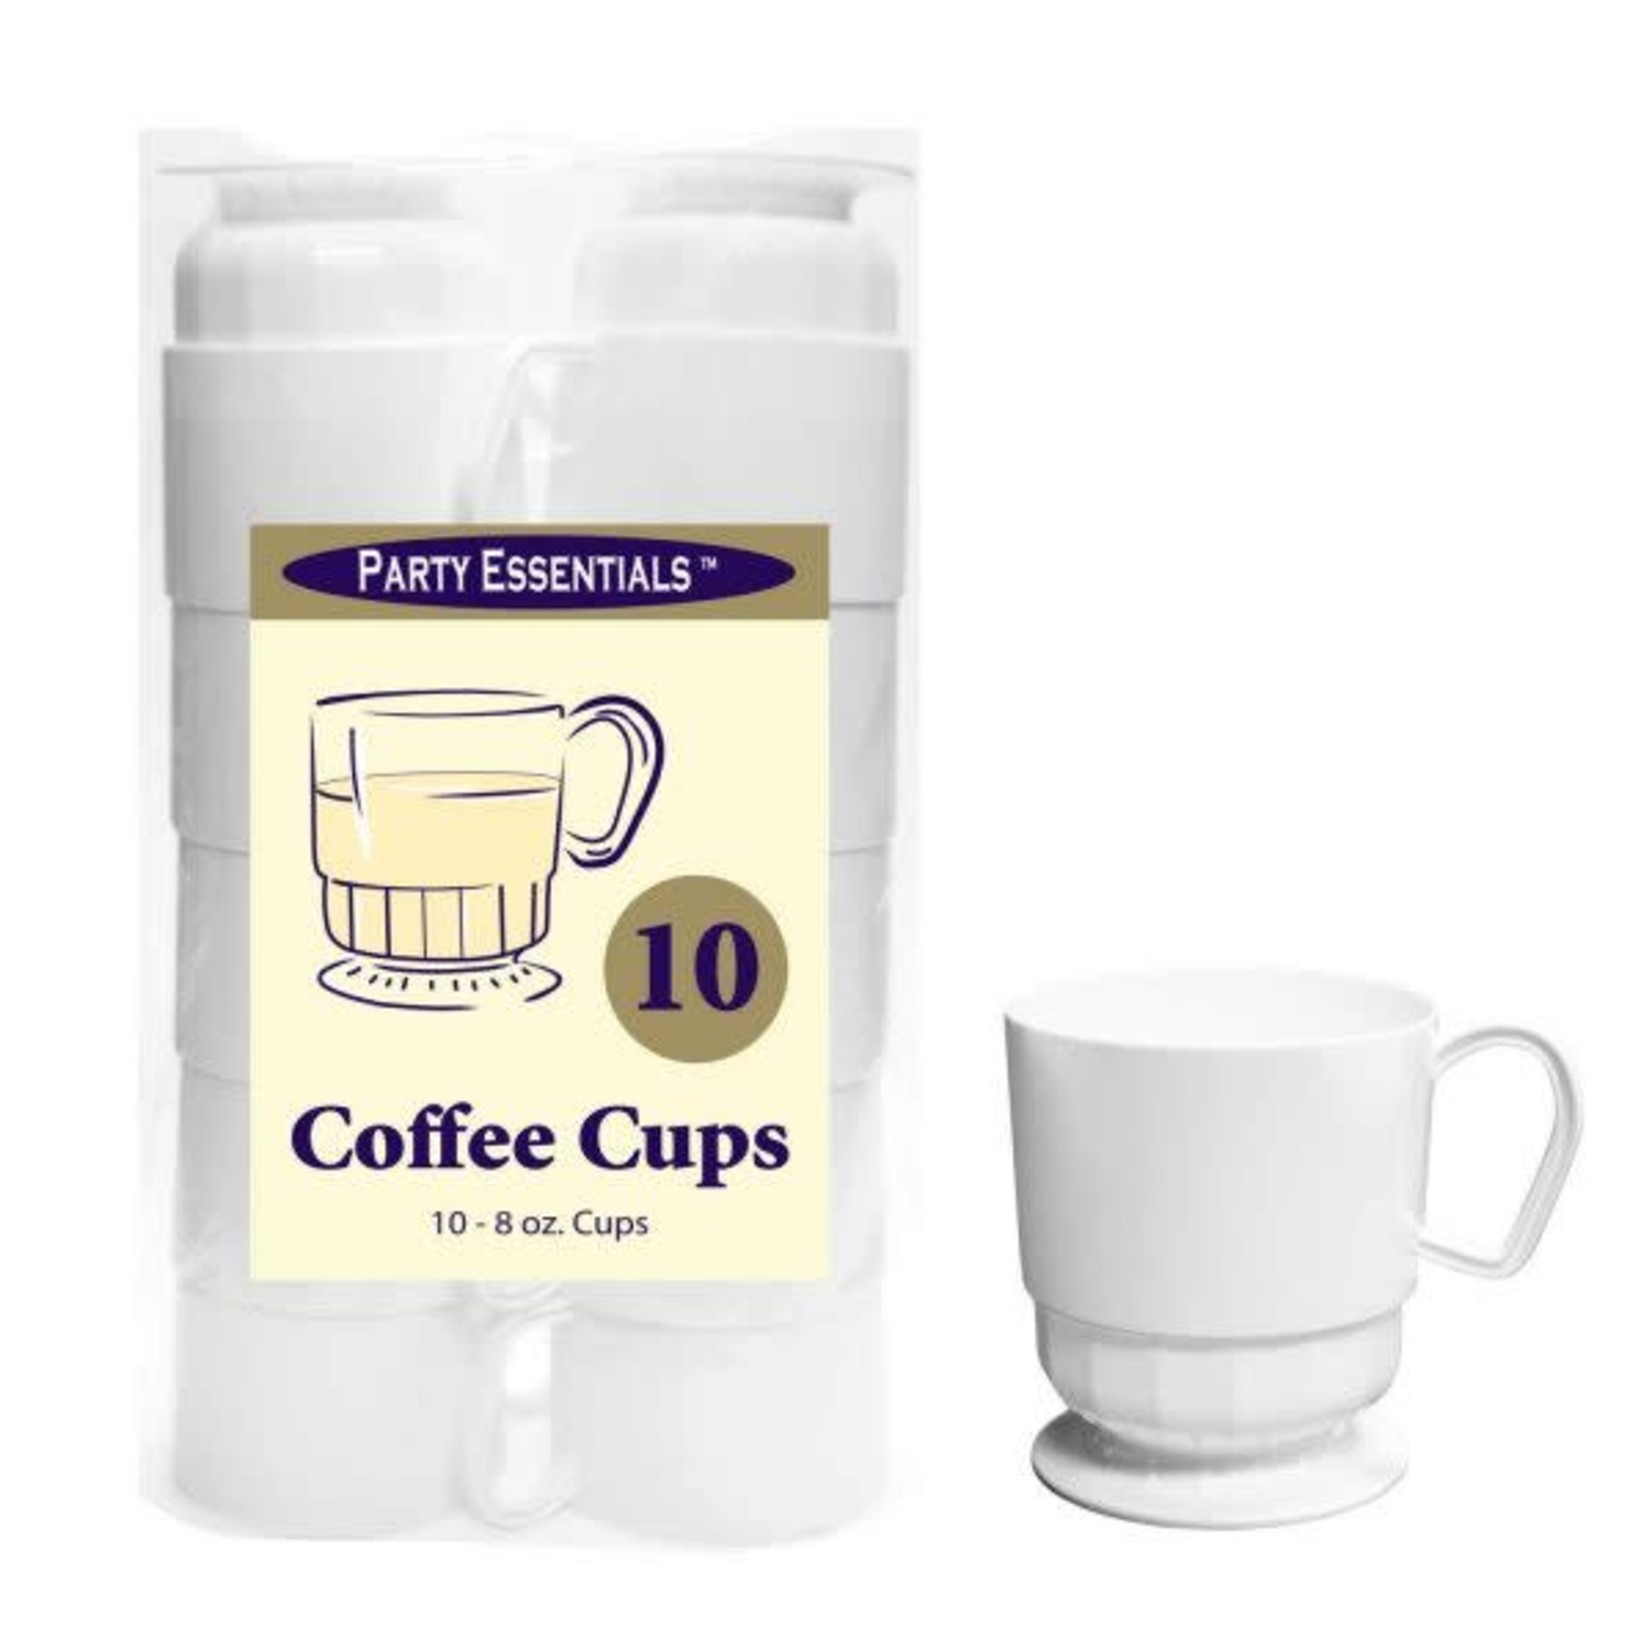 Party Essentials 8 oz. Deluxe Coffee Cups - White 10 Ct.